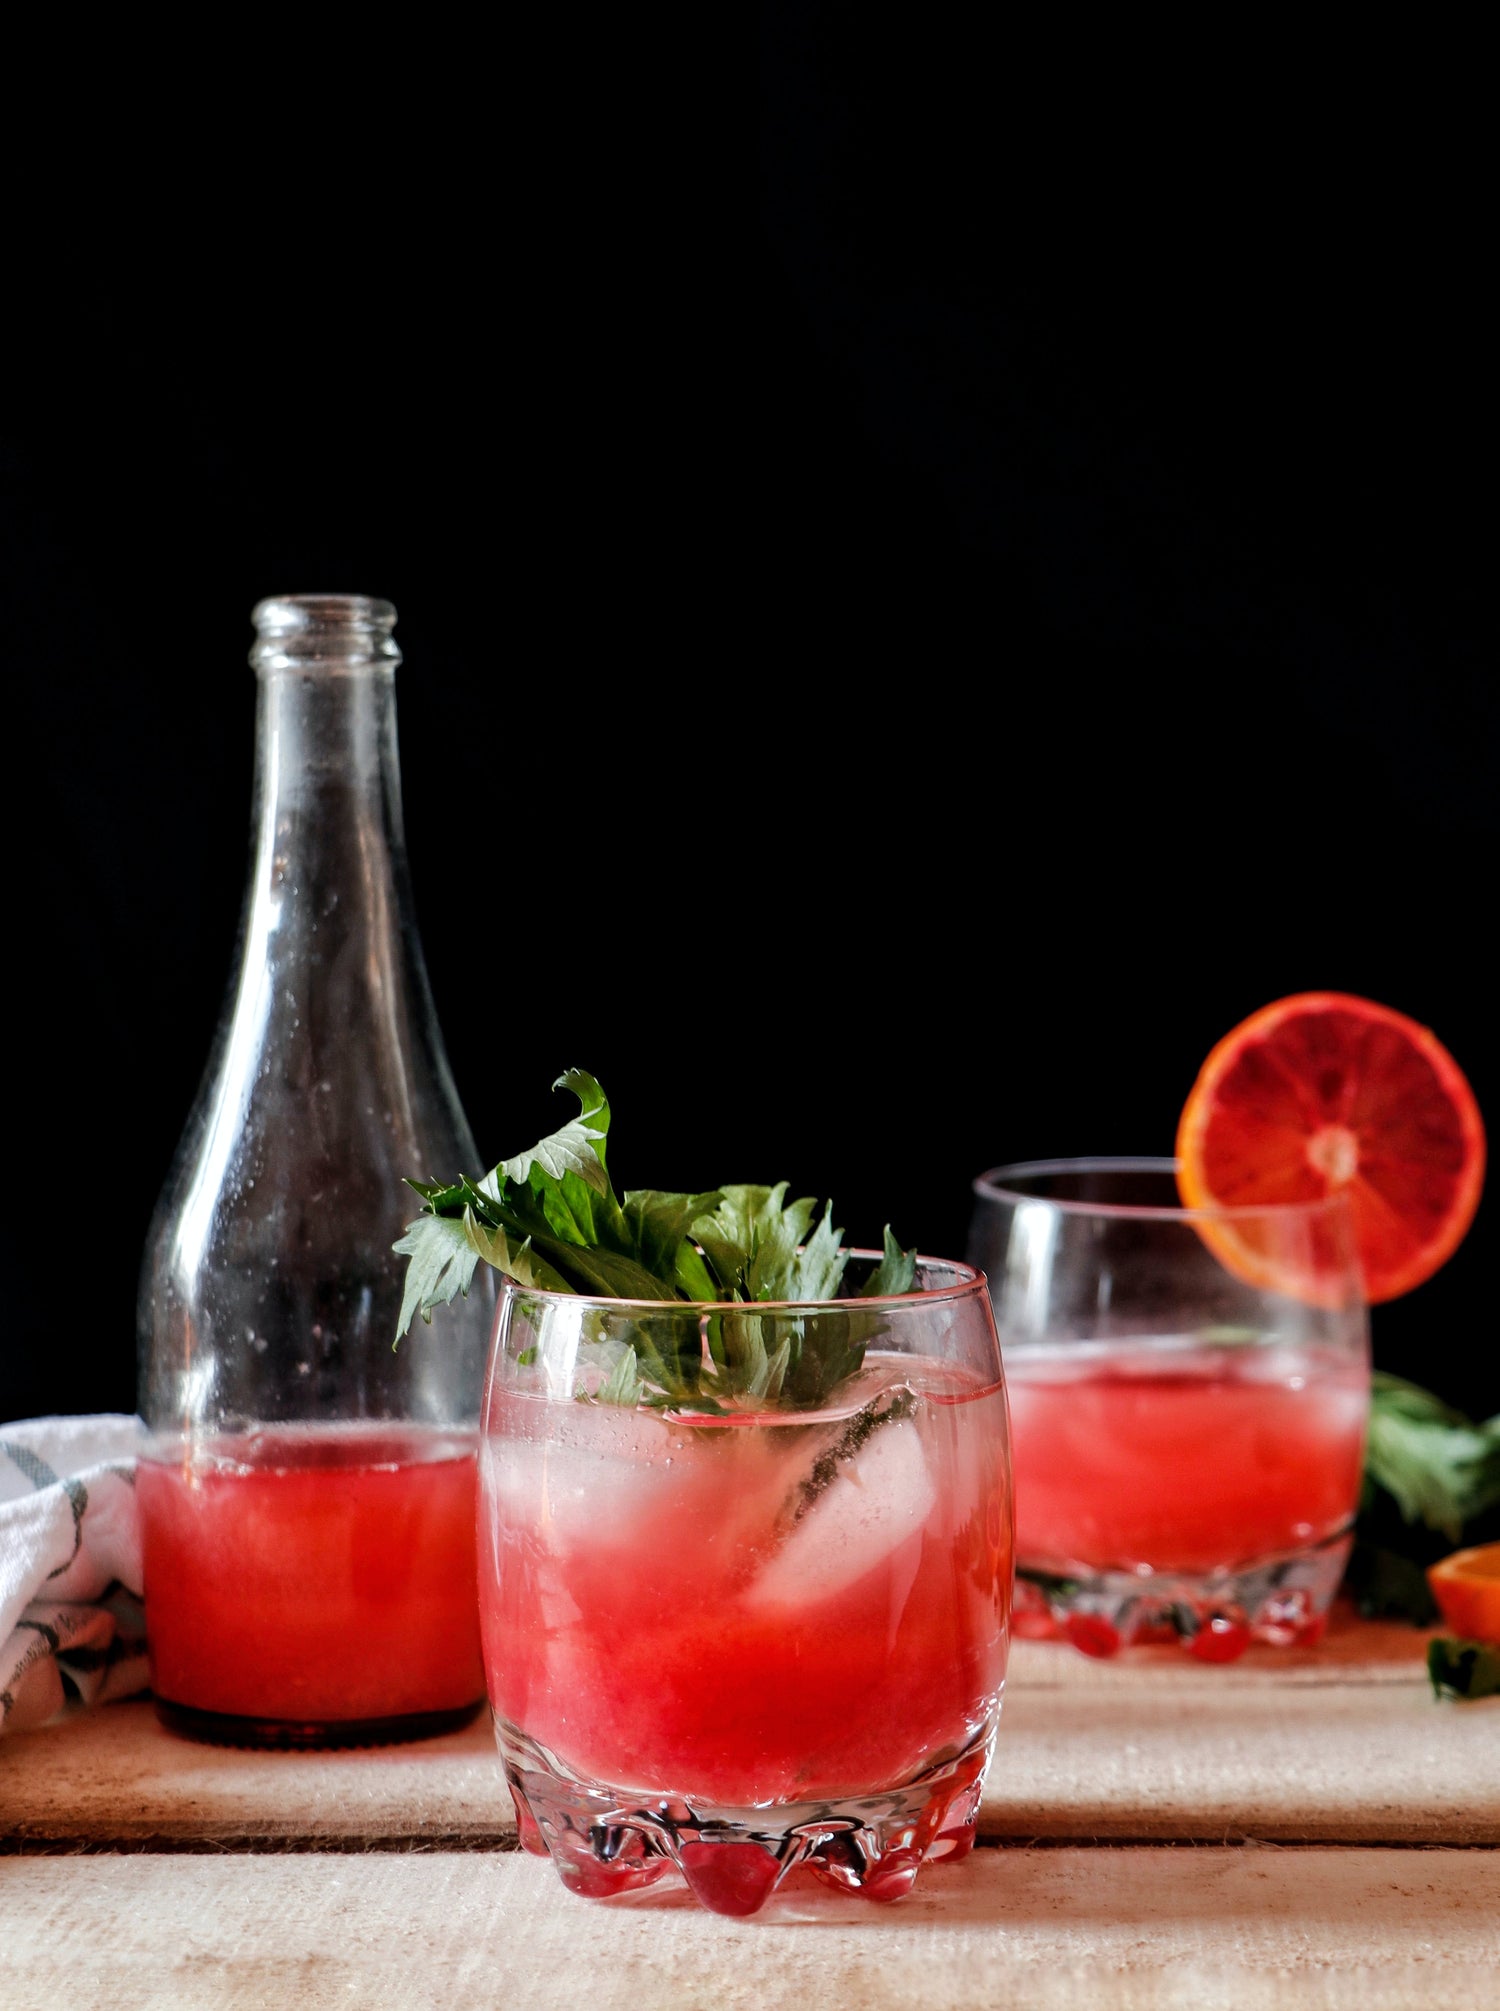 Bright pink juice in glasses on wooden table.